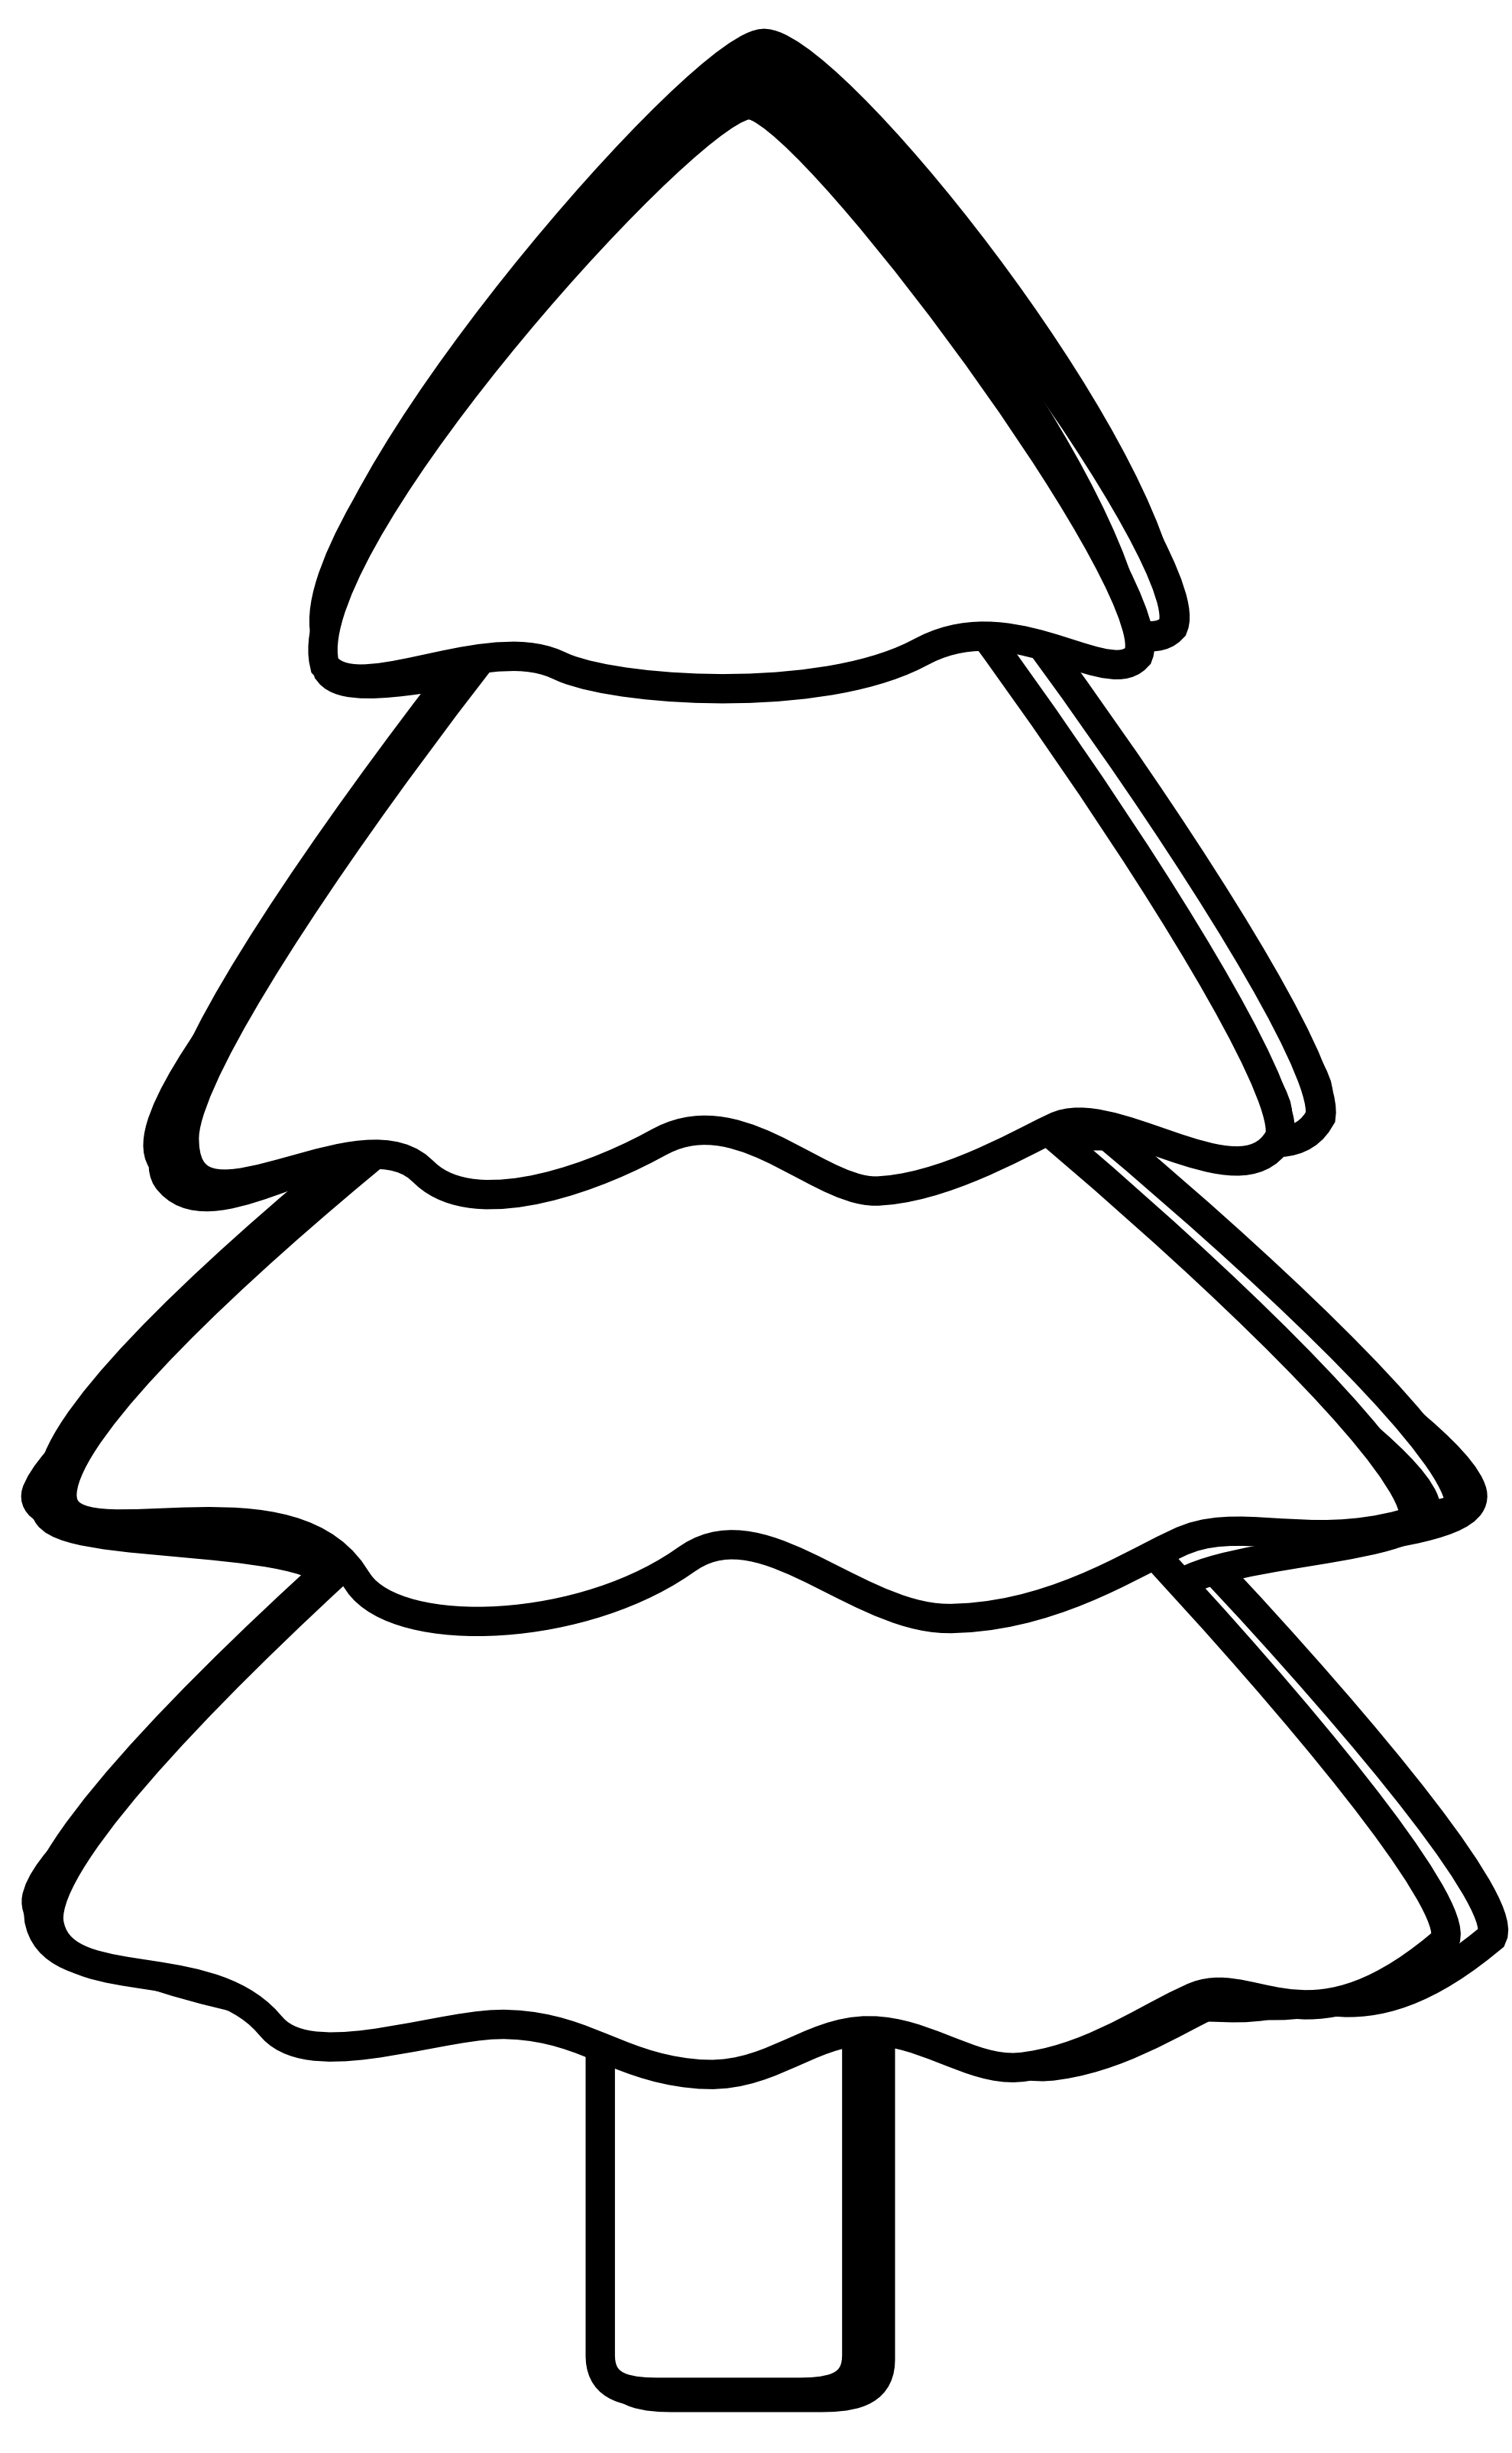 Black And White Trees Clipart | Clipart library - Free Clipart Images